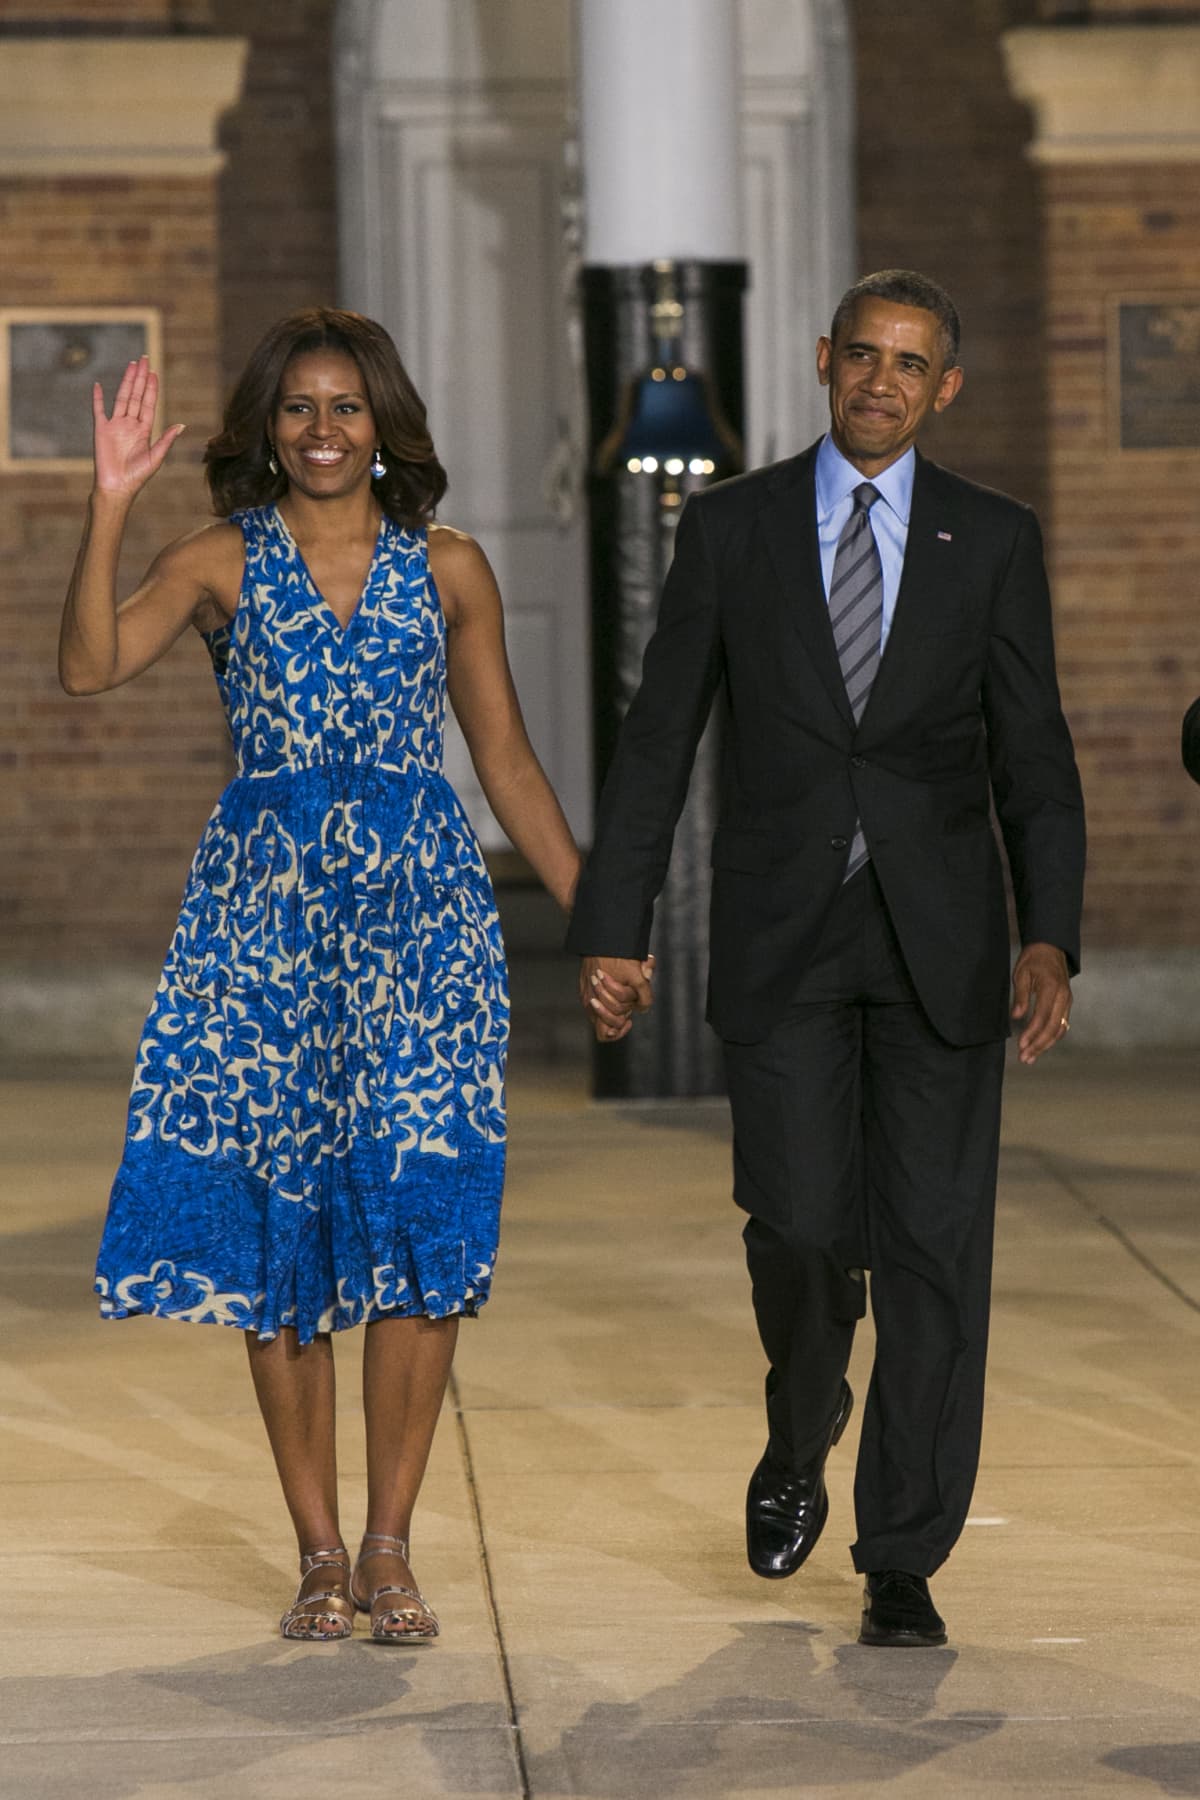 U.S. President Barack Obama and first lady Michelle Obama arrive for the Marine Barracks Evening Parade on June 27, 2014 in Washington, DC. Earlier in the day Obama, first lady Michelle Obama and daughter Sasha went to BLK Steak restaurant in Washington.